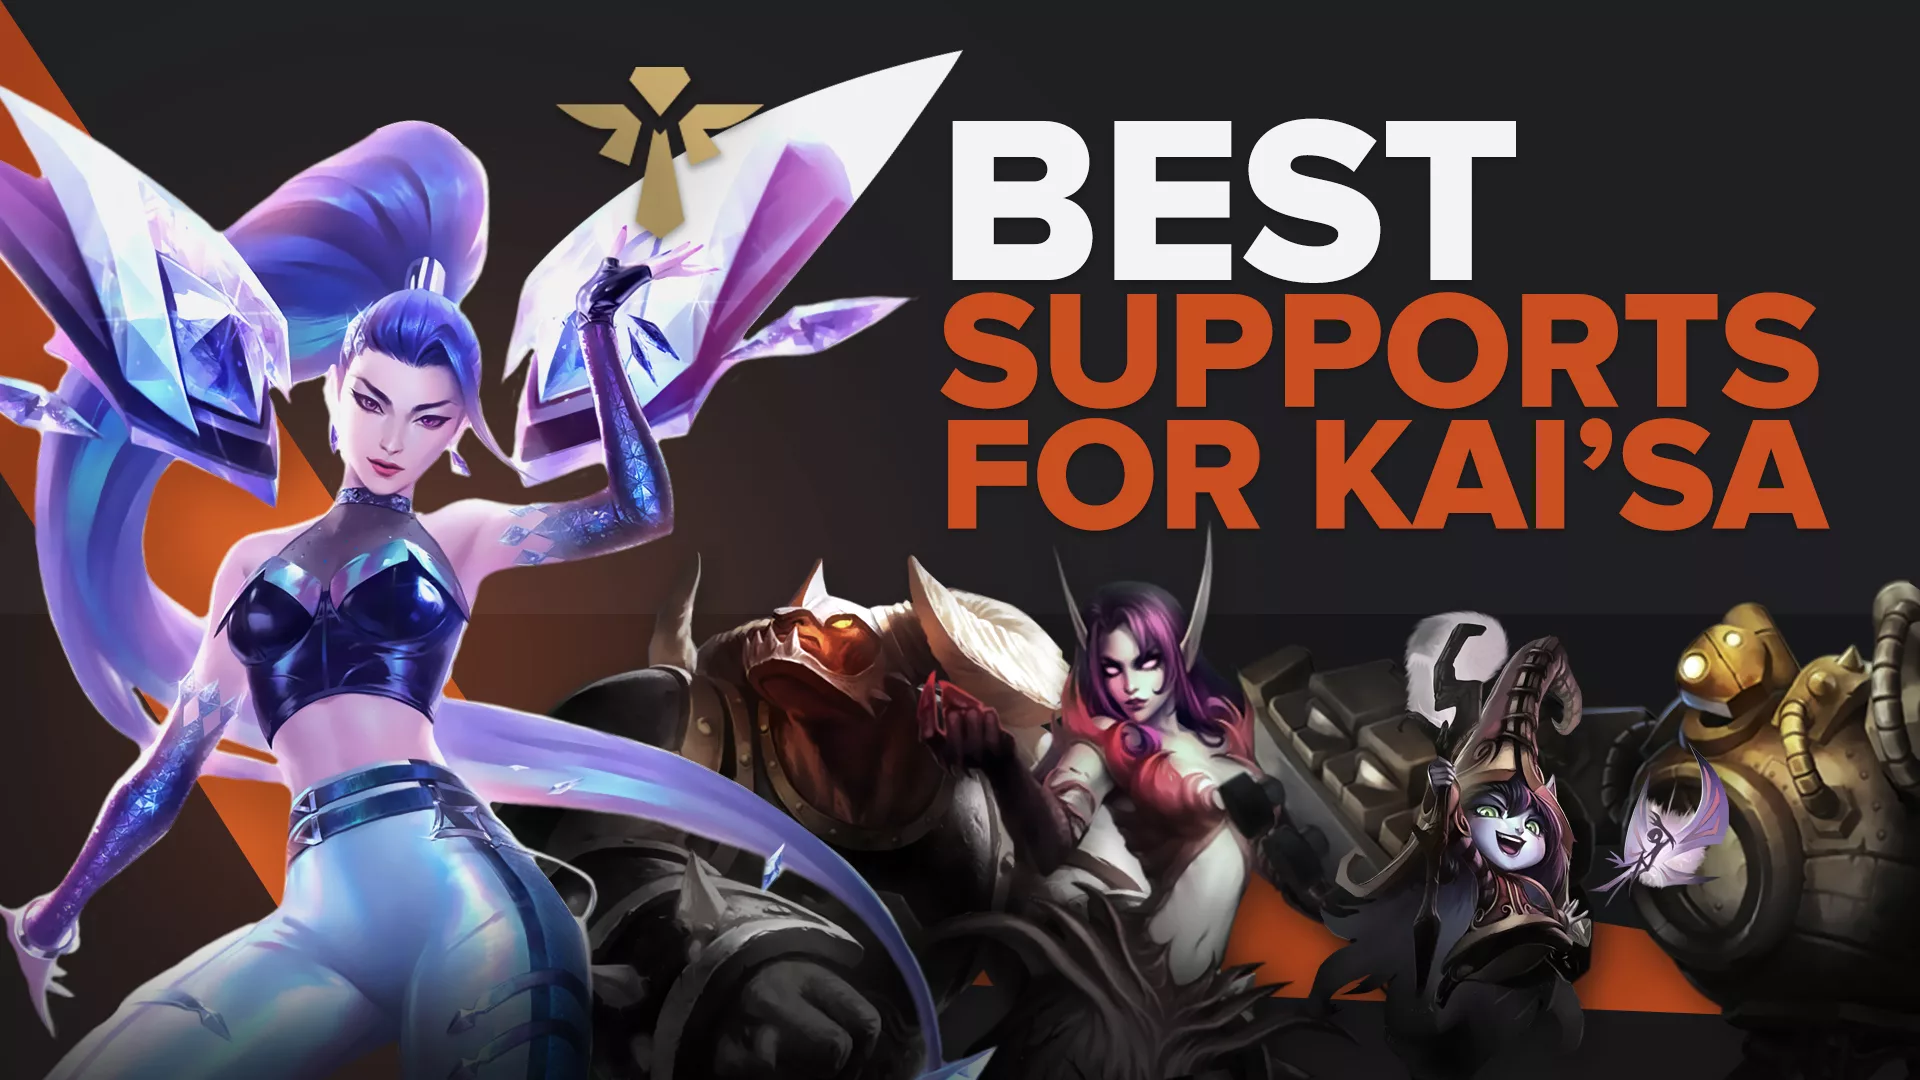 What are the Best Supports for Kai’Sa in League of Legends